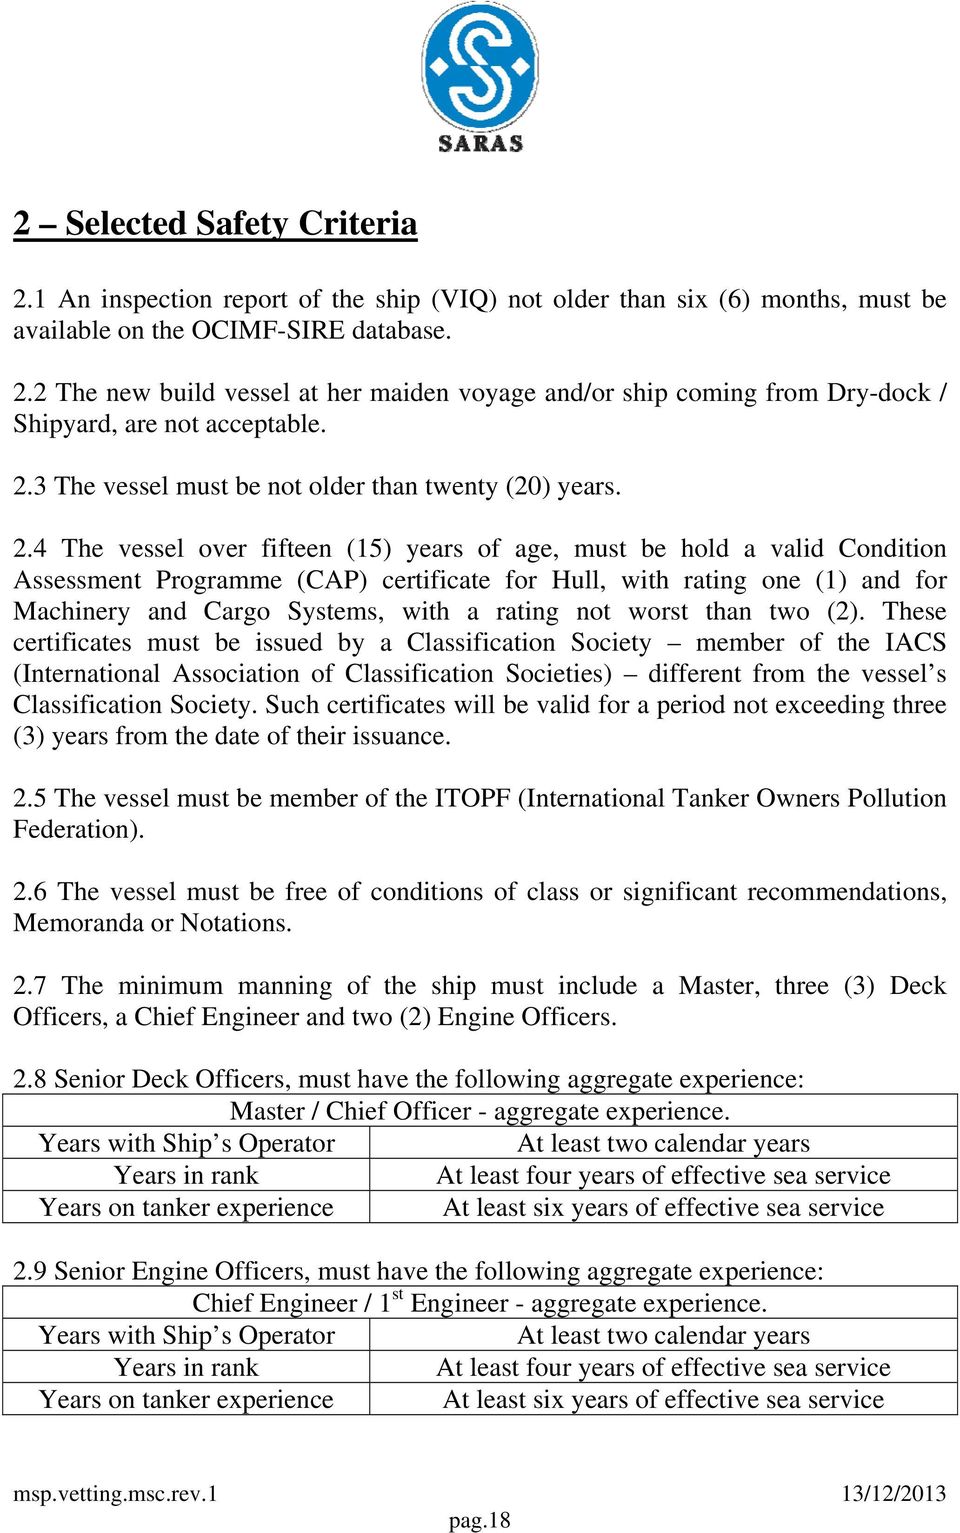 4 The vessel over fifteen (15) years of age, must be hold a valid Condition Assessment Programme (CAP) certificate for Hull, with rating one (1) and for Machinery and Cargo Systems, with a rating not